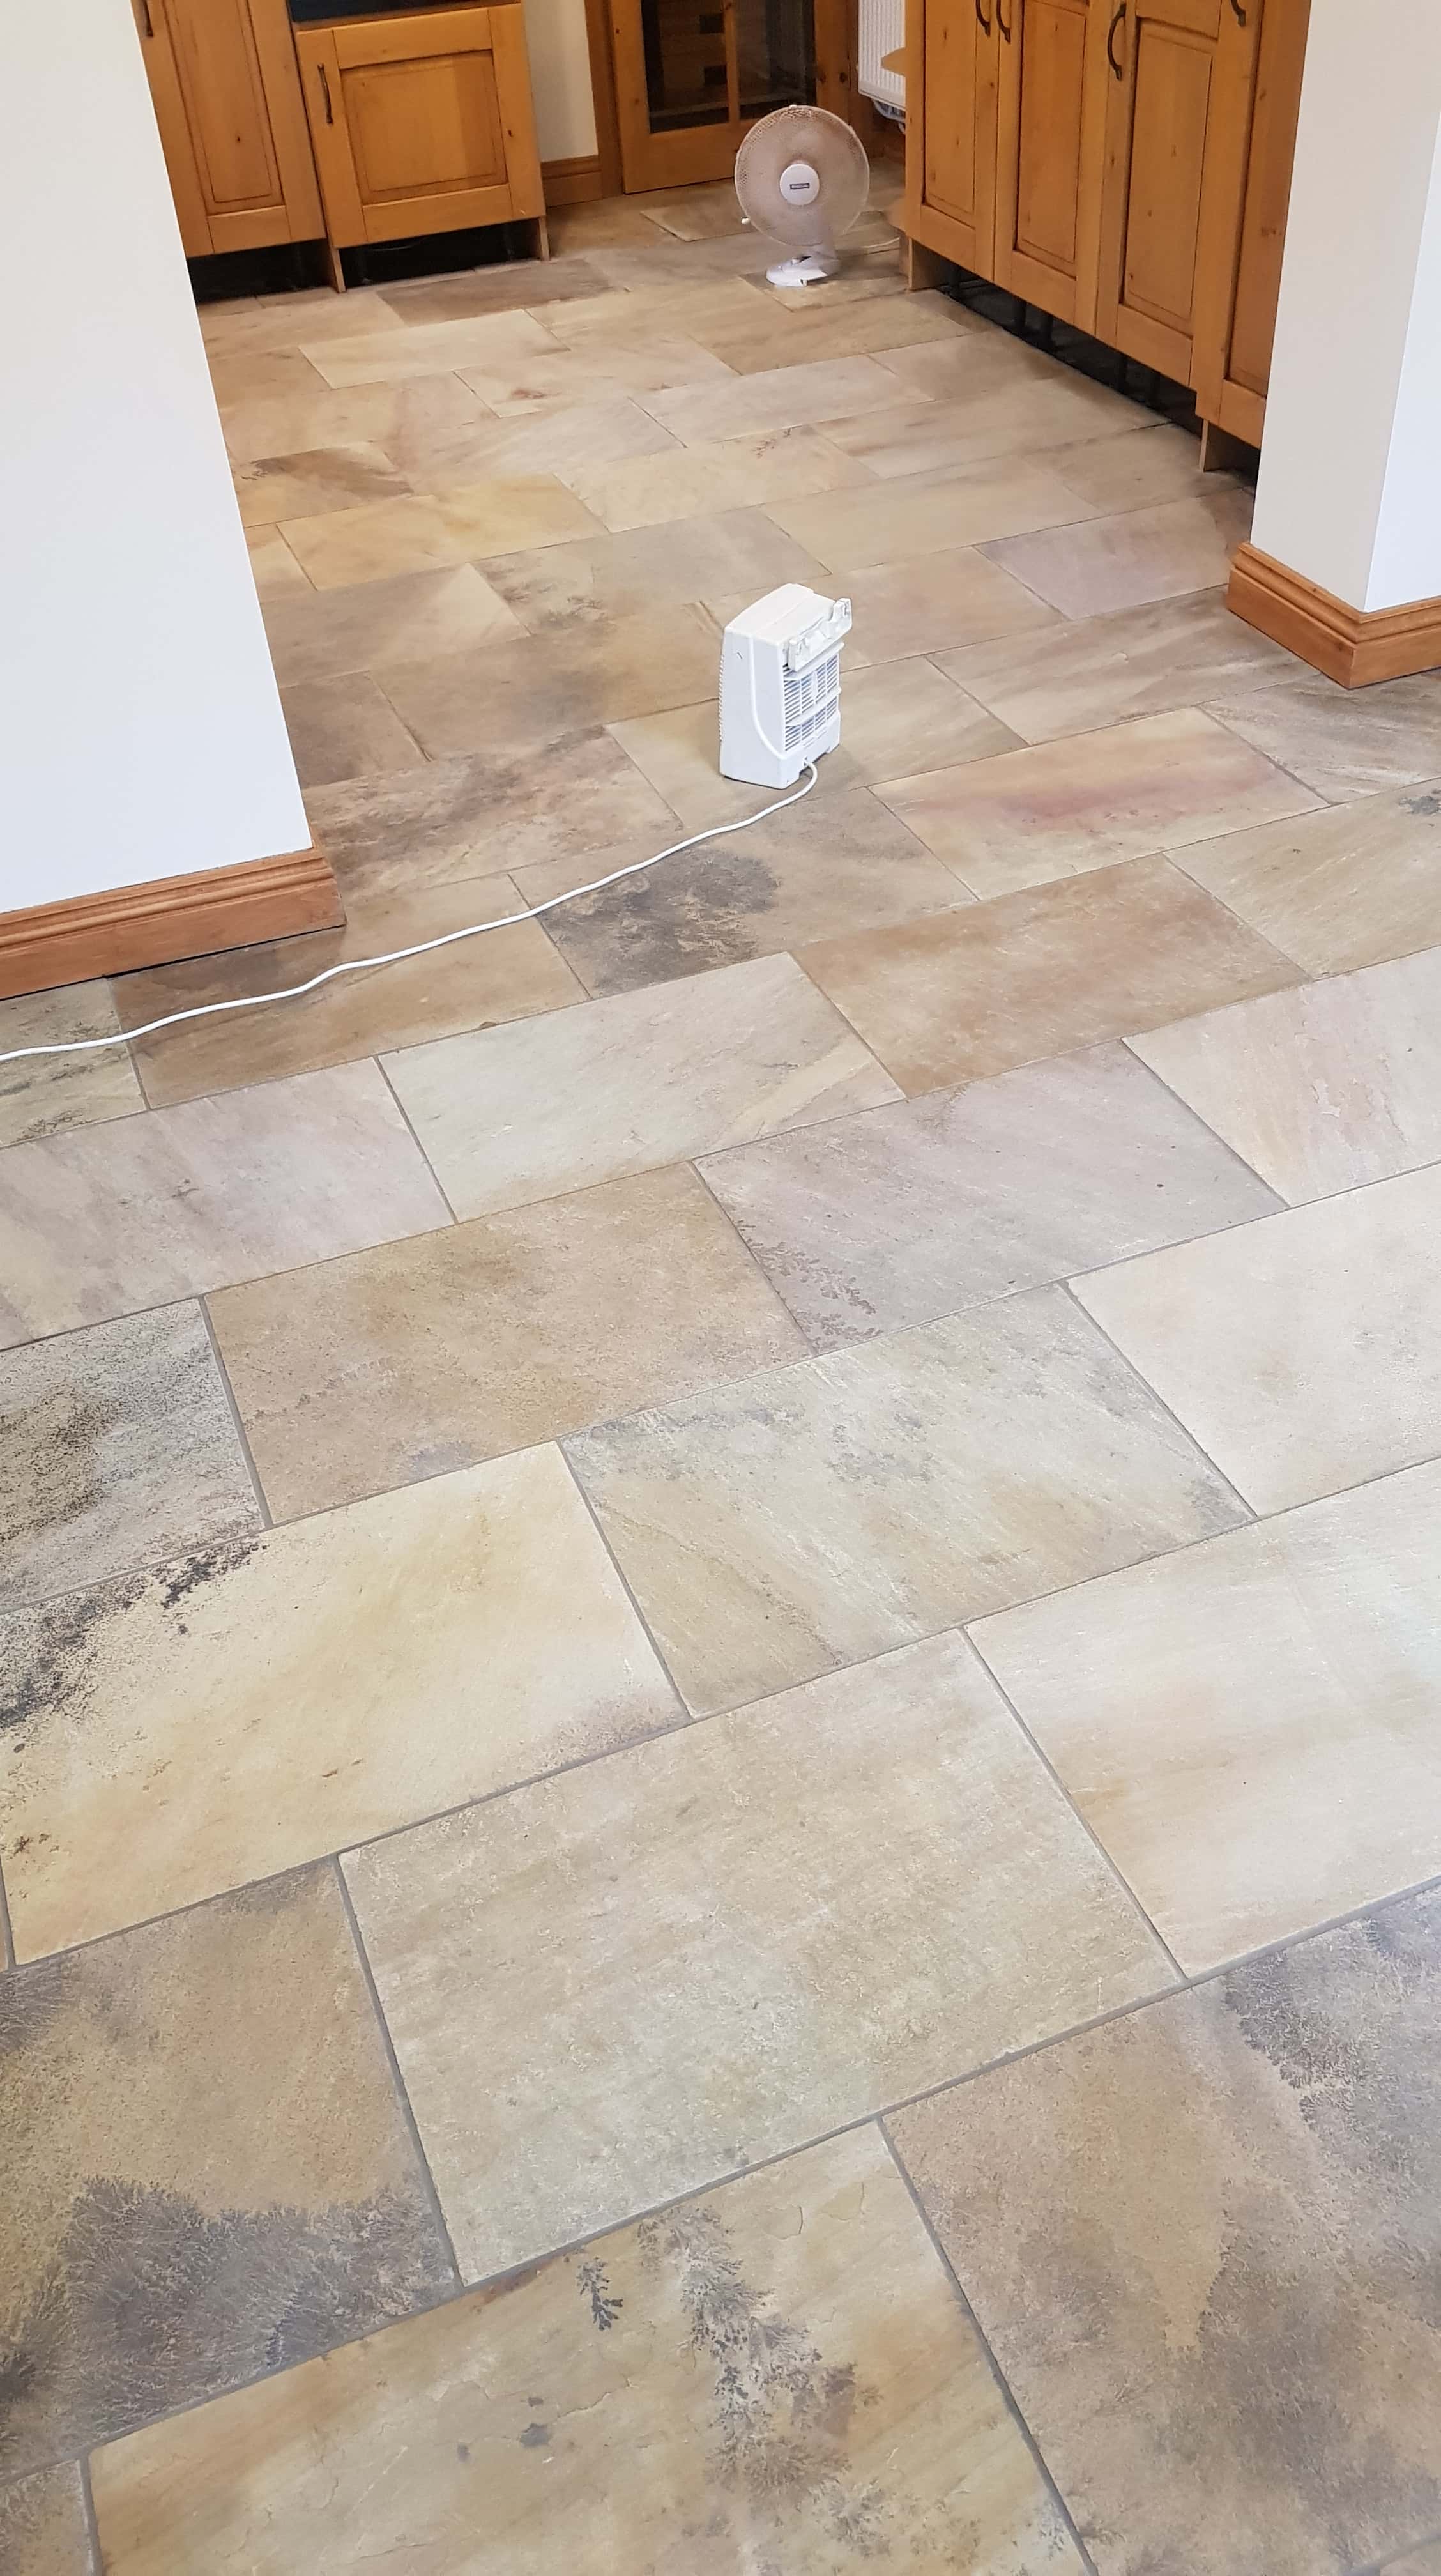 Sandstone Tiled Kitchen Floor After Cleaning in Mapplewell